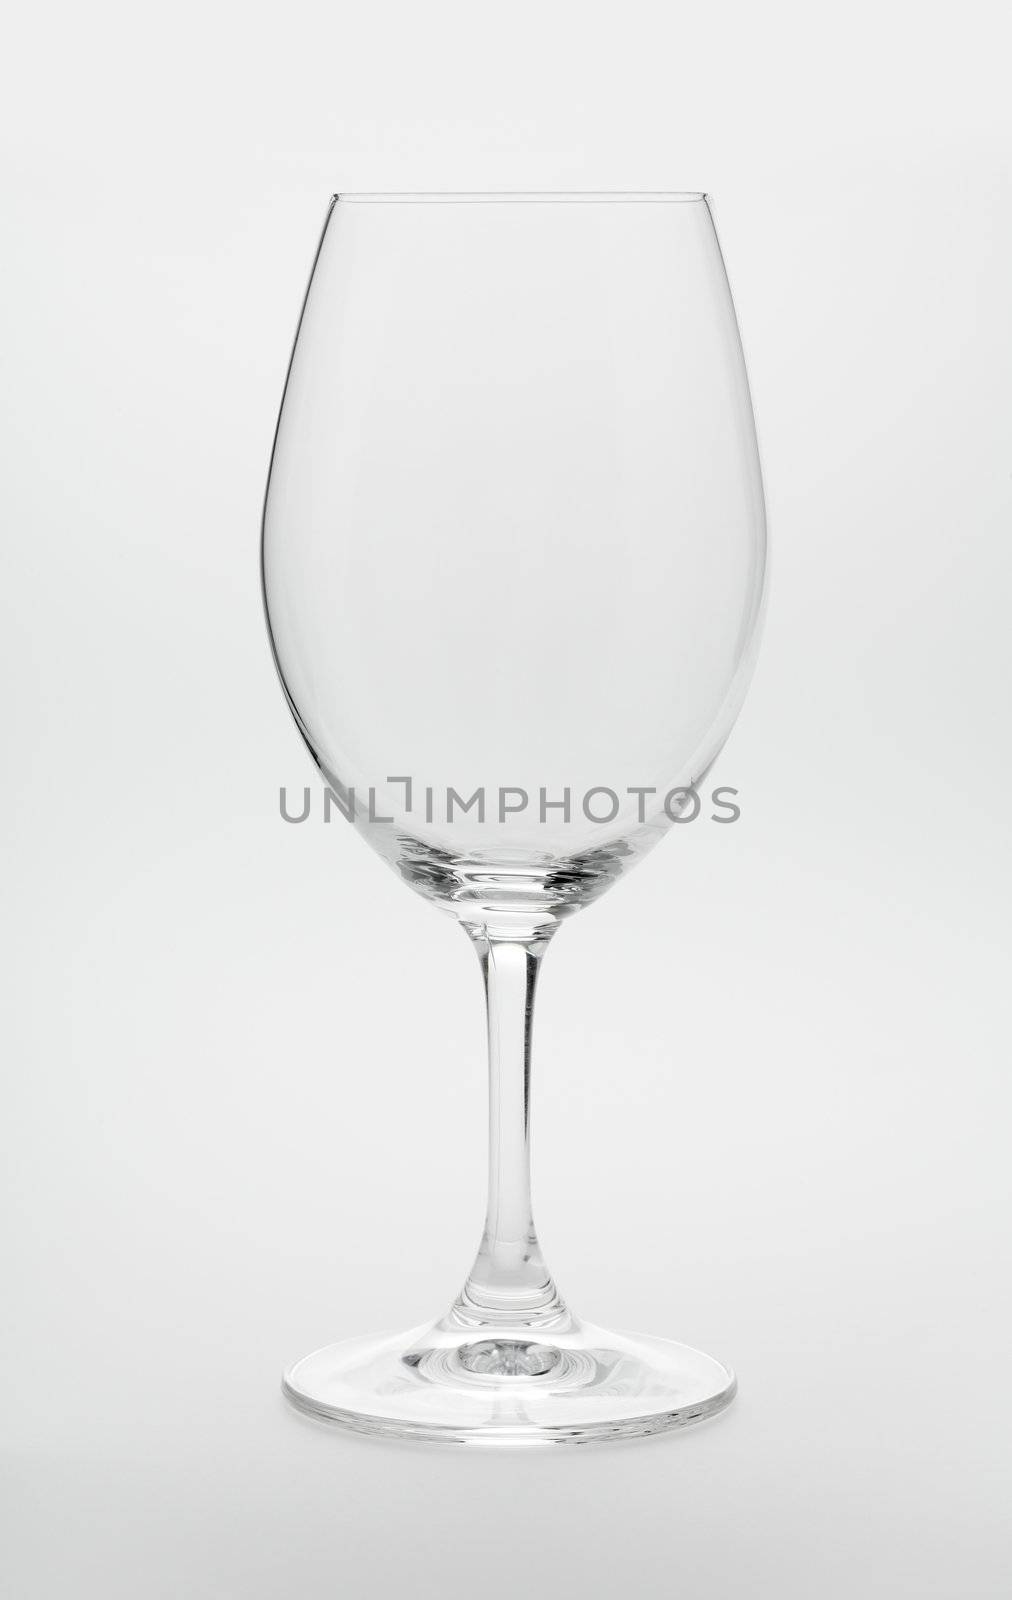 Wine glass by Stocksnapper